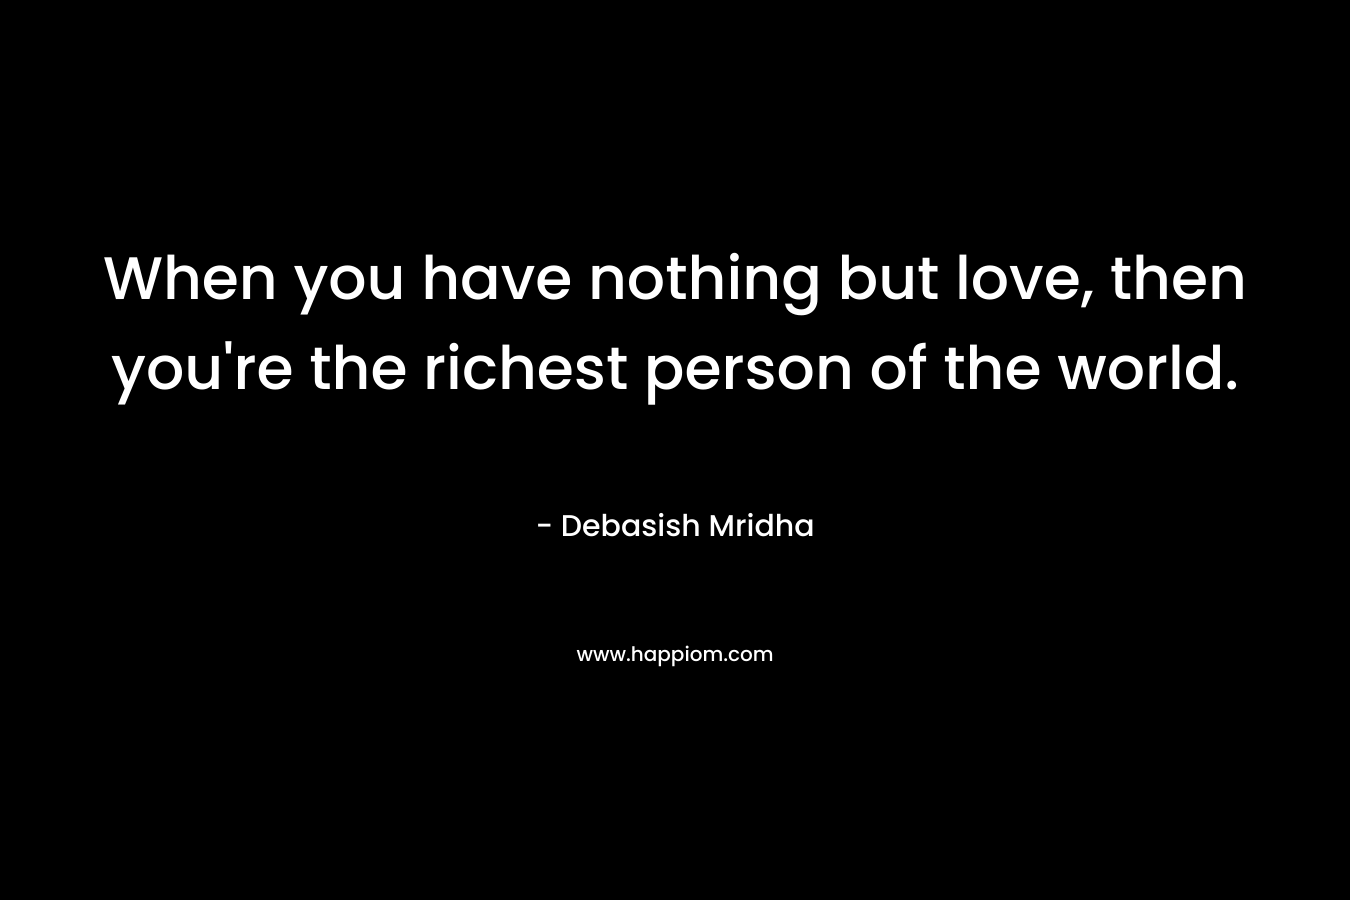 When you have nothing but love, then you're the richest person of the world.